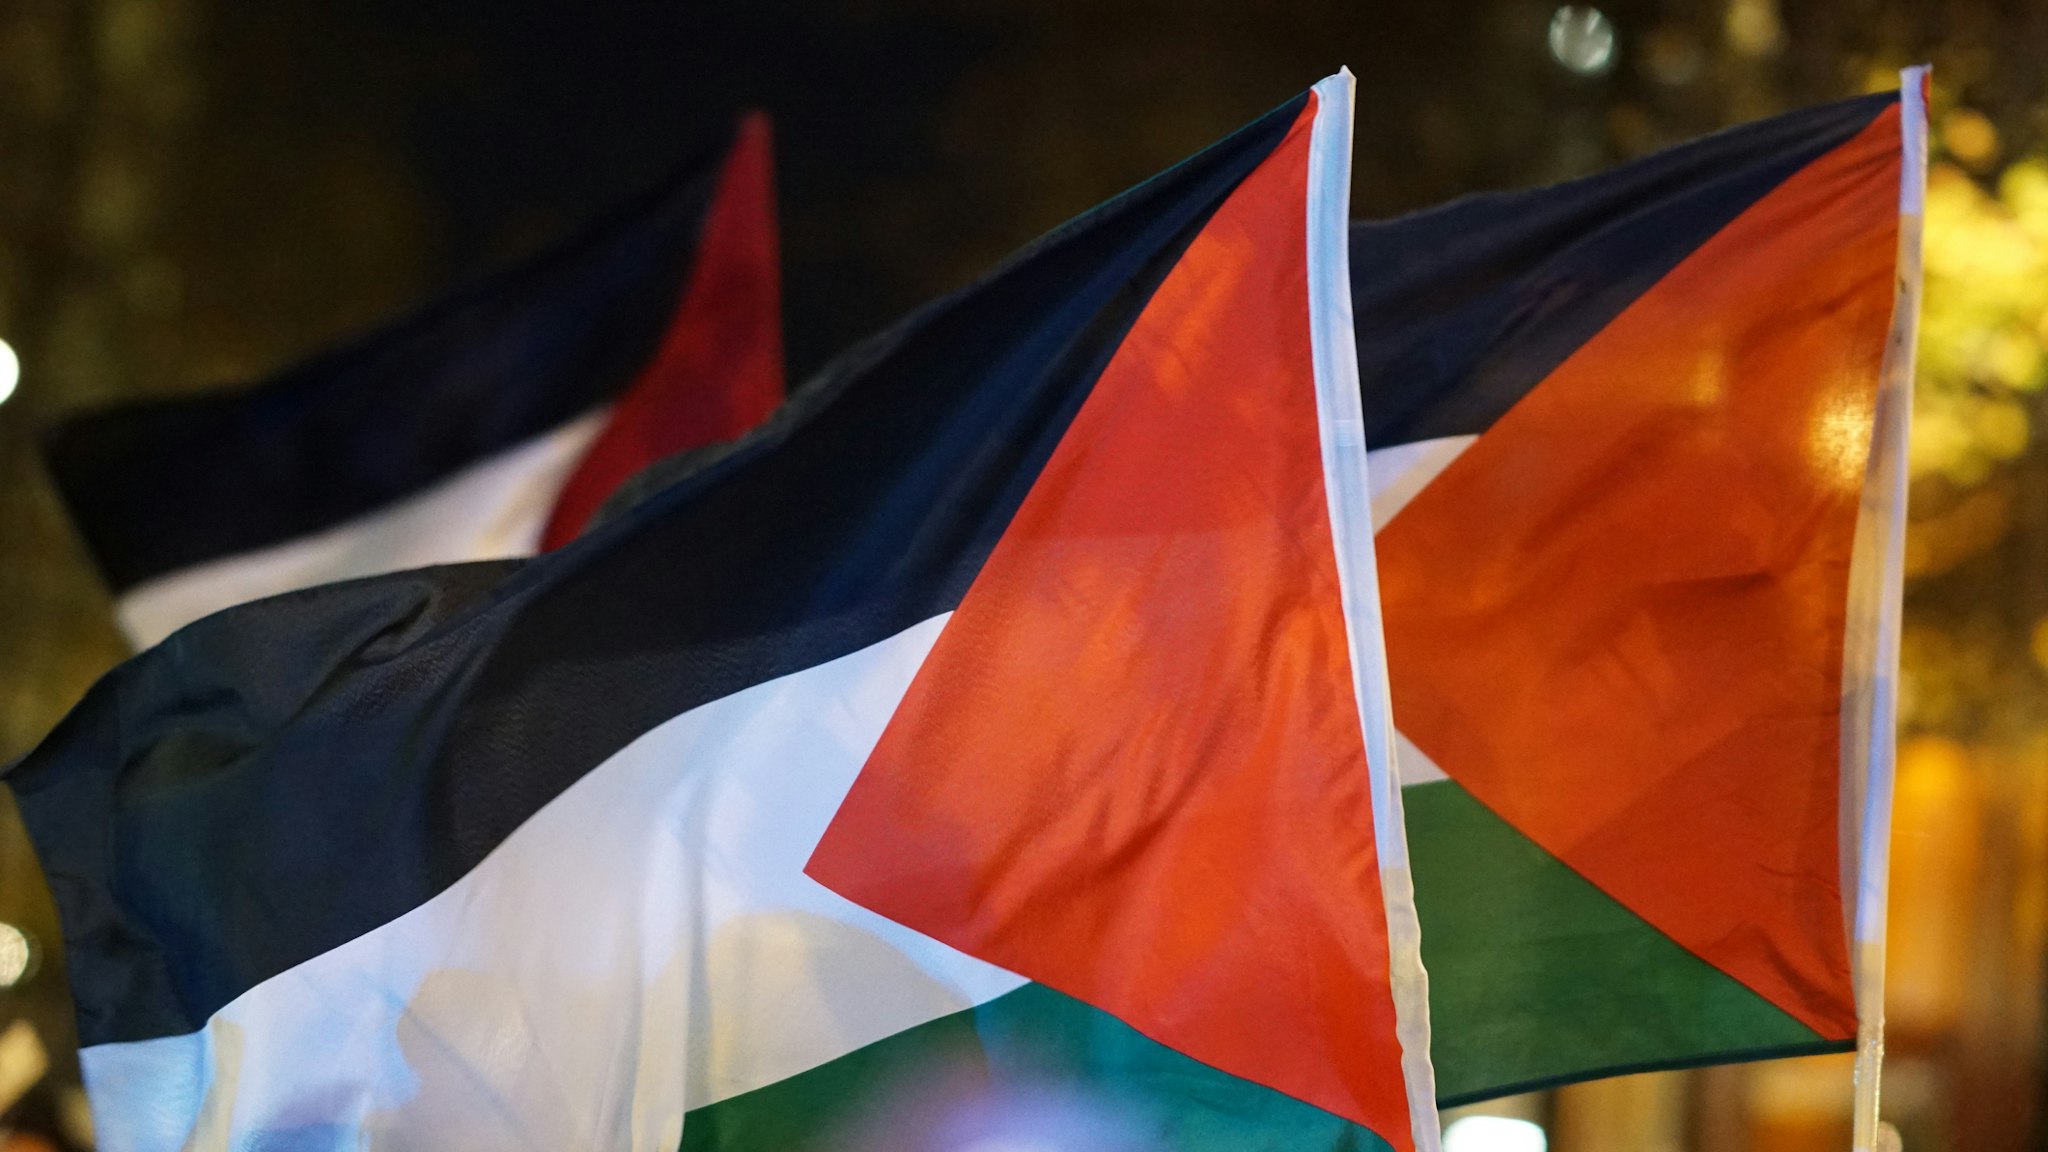 Close-Up Of Palestinian Flags At Night - stock photo